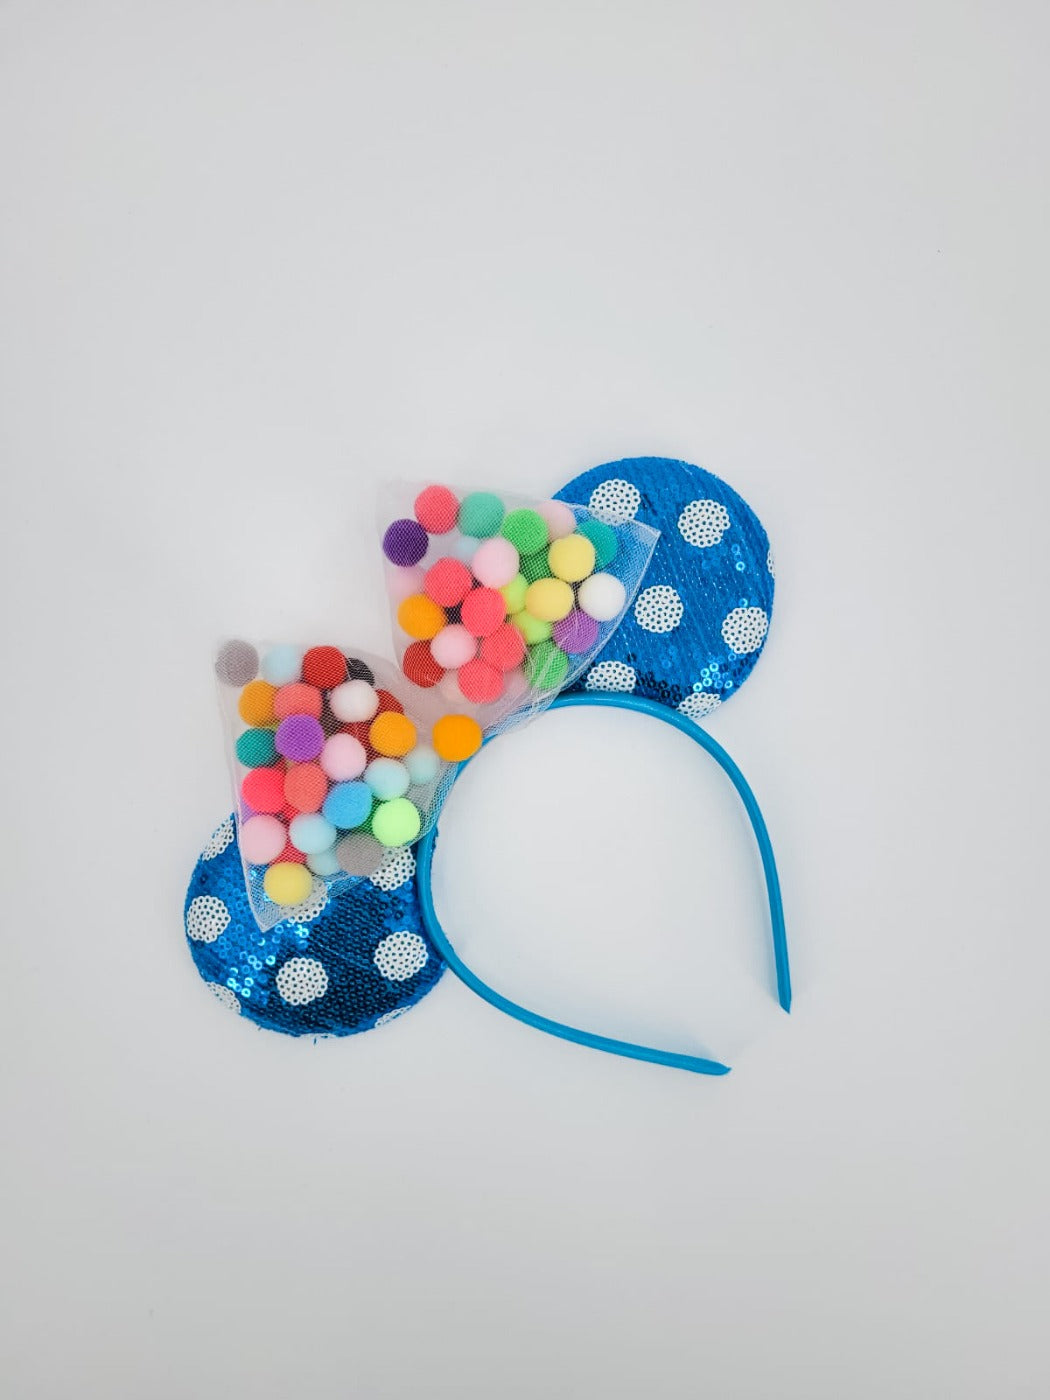 Blue and White Polka Dot Sequined Headband with Pompom Bow